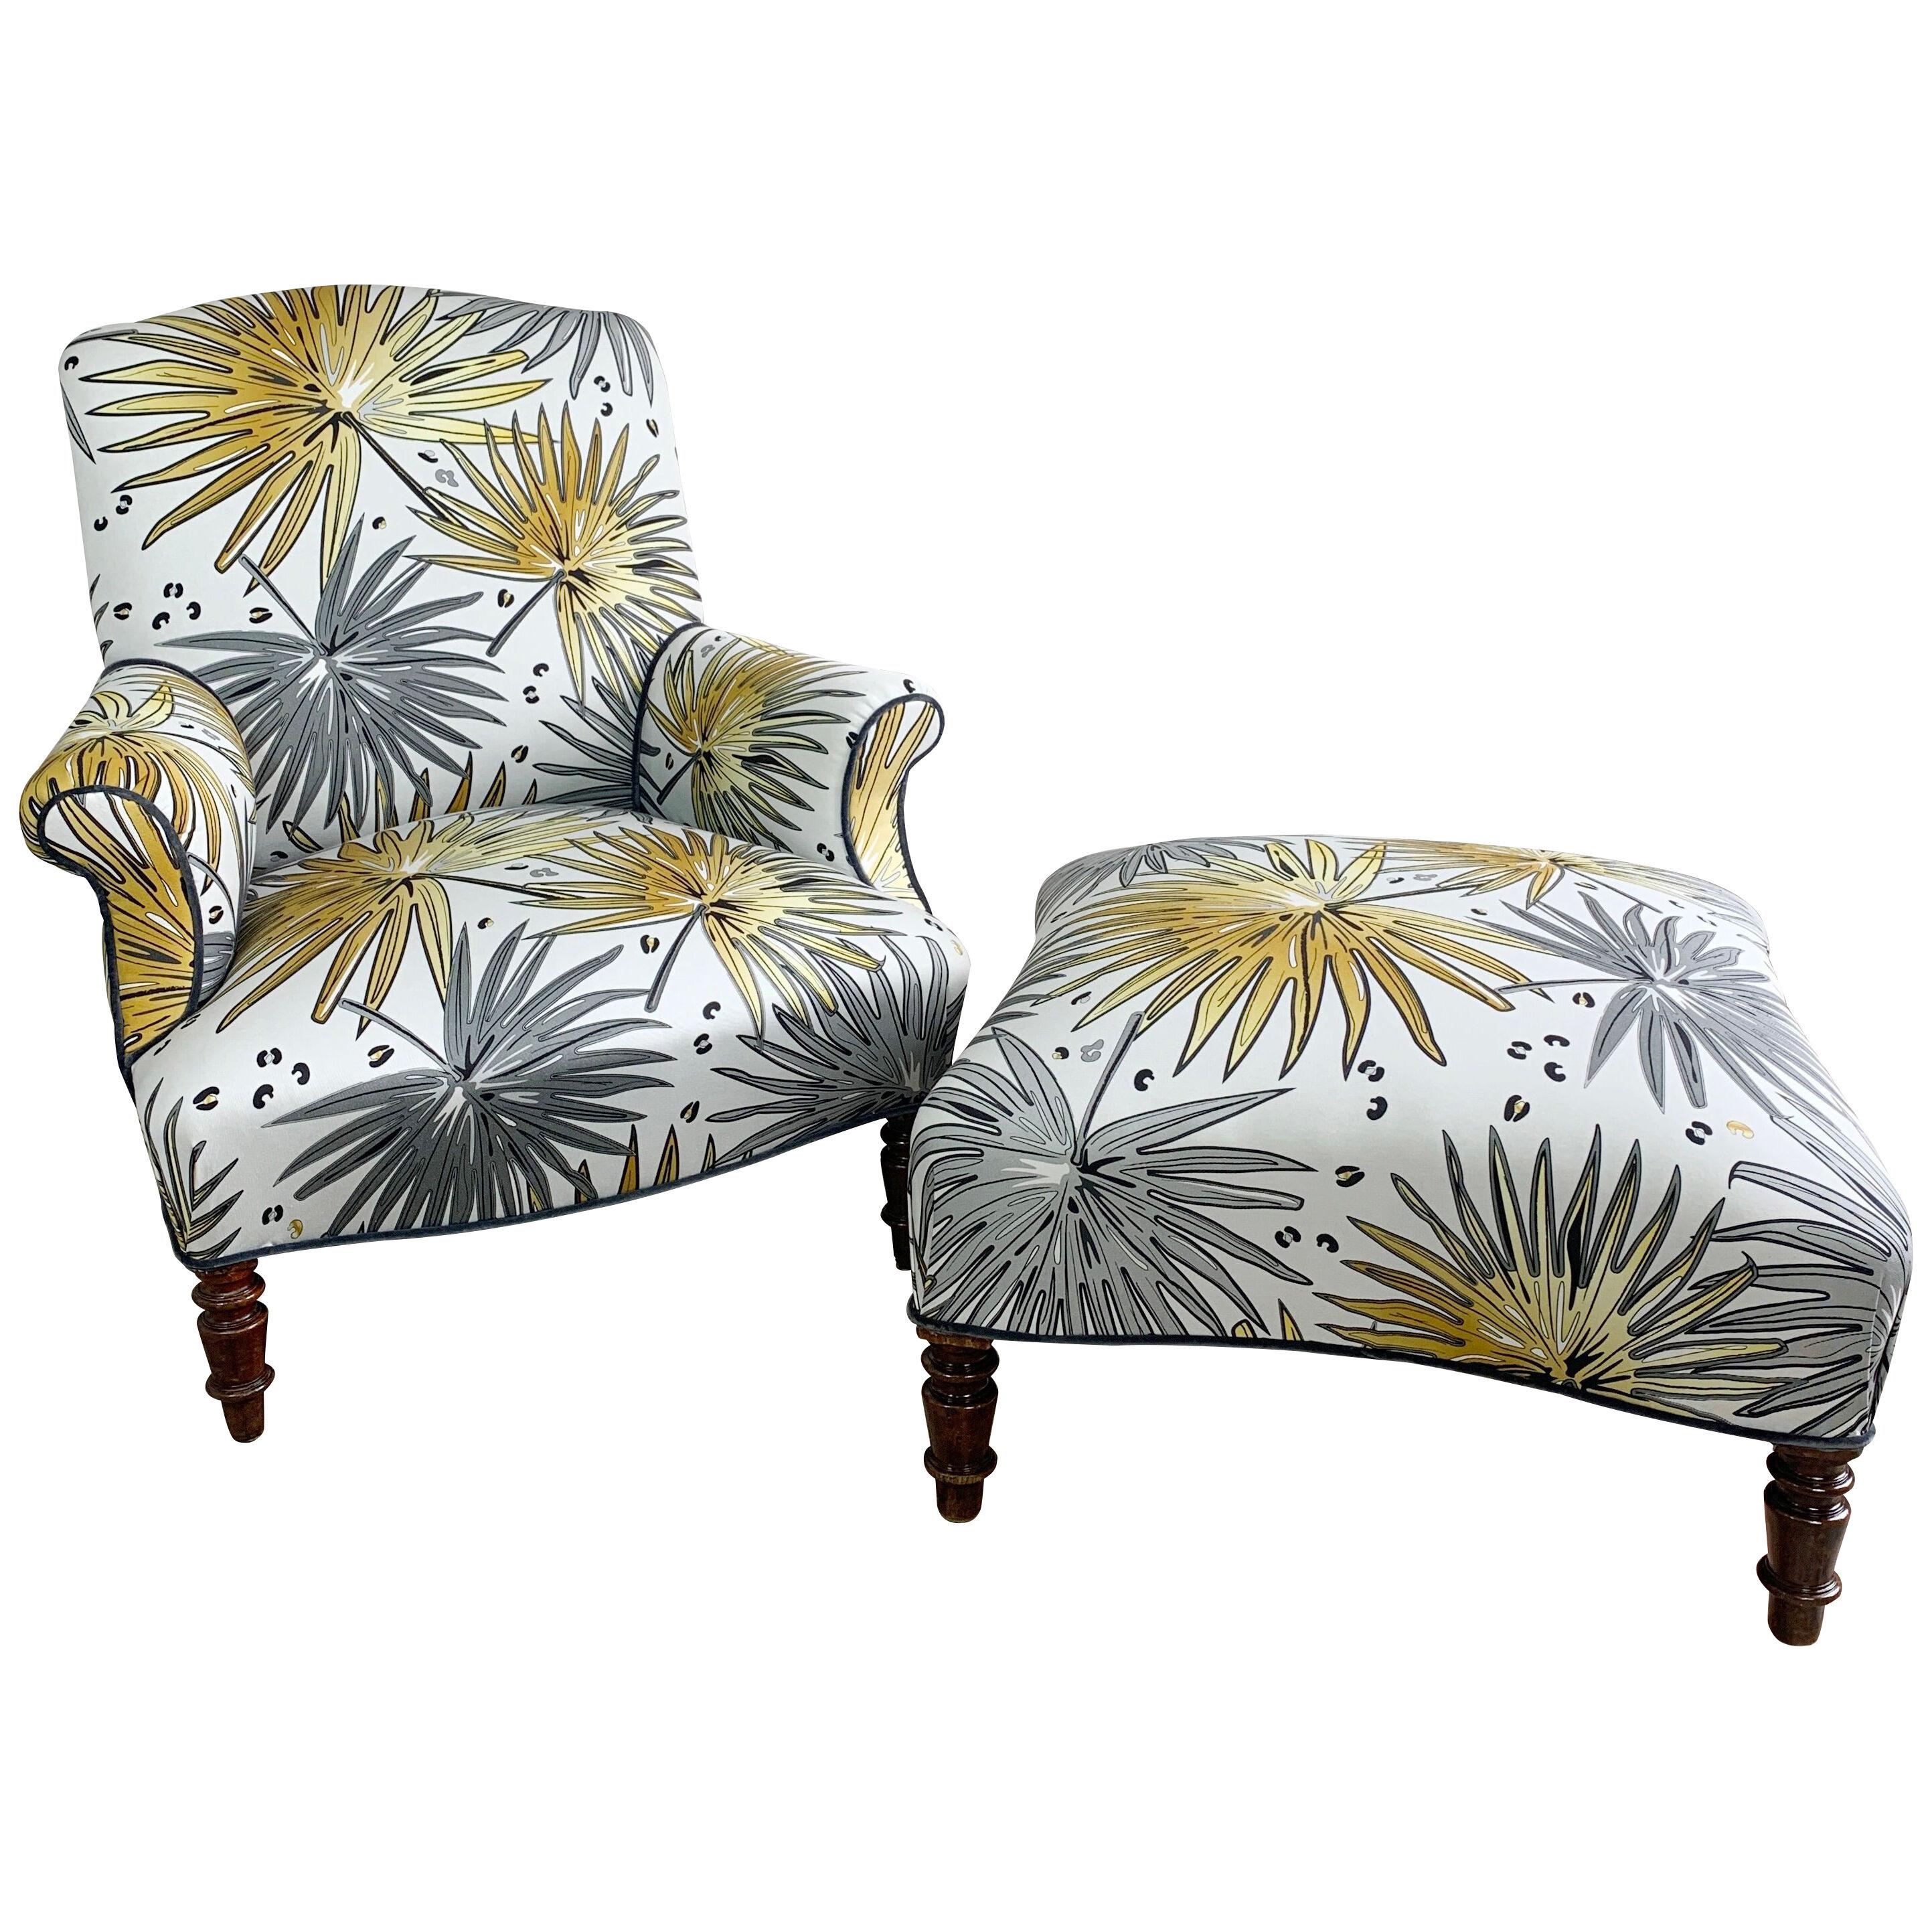 Napoleon lll Armchair and Footstool in Tropics 'Fan Palm' Fabric 